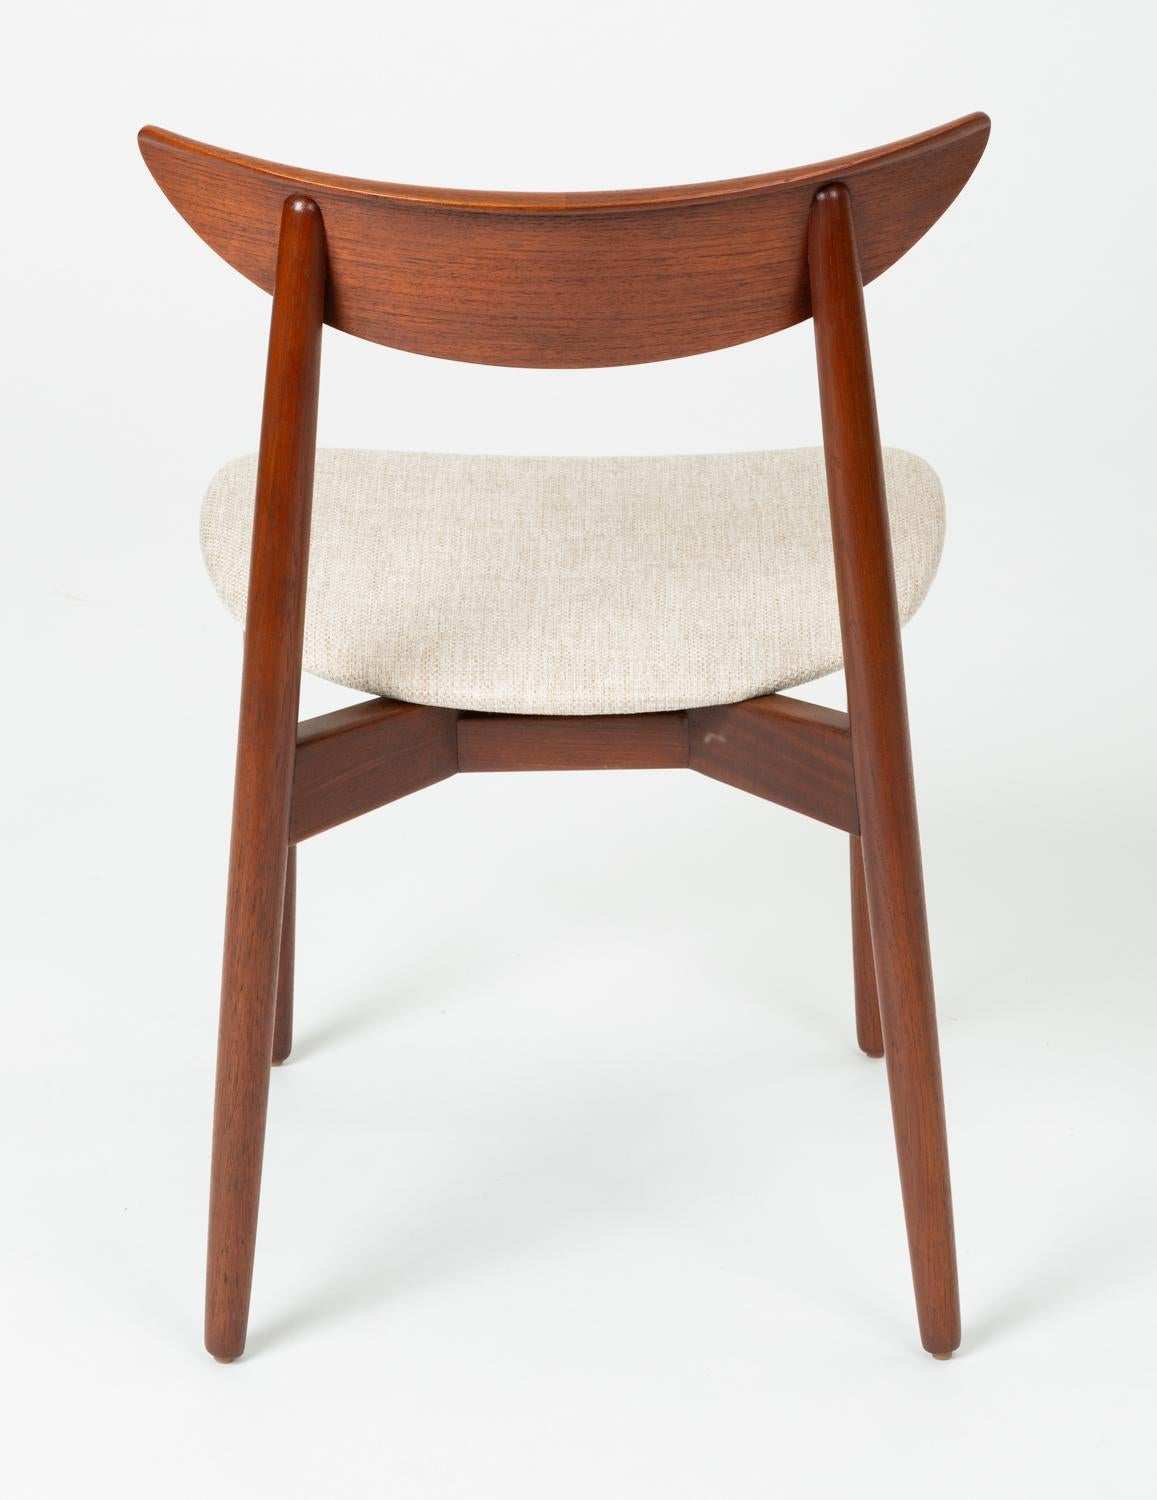 20th Century Single Dining or Accent Chair by Harry Østergaard for Randers Møbelfabrik